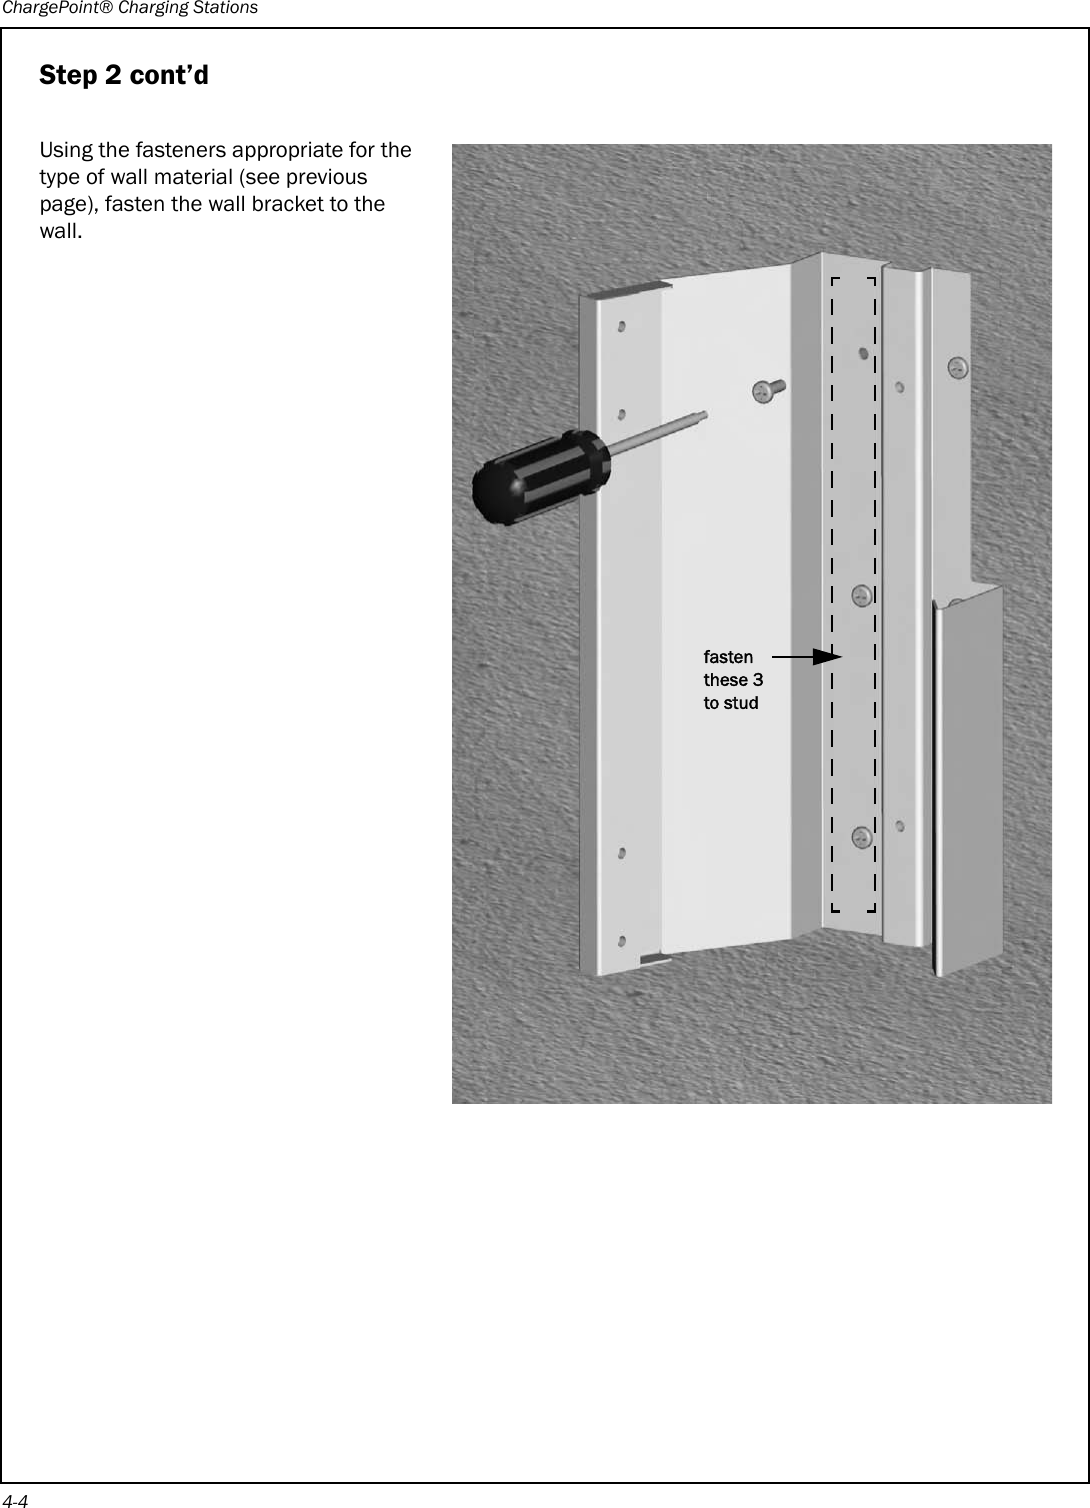 ChargePoint® Charging Stations4-4Step 2 cont’dUsing the fasteners appropriate for the type of wall material (see previous page), fasten the wall bracket to the wall.fasten these 3 to stud